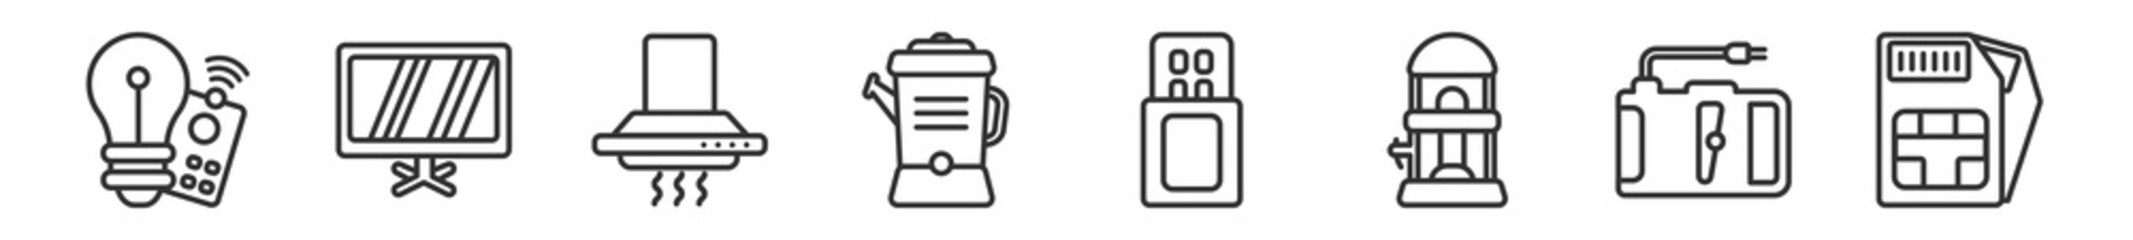 outline set of electronic devices line icons. linear vector icons such as smart light, smart tv, exhaust hood, percolator, usb wireless adapter, sim. vector illustration.